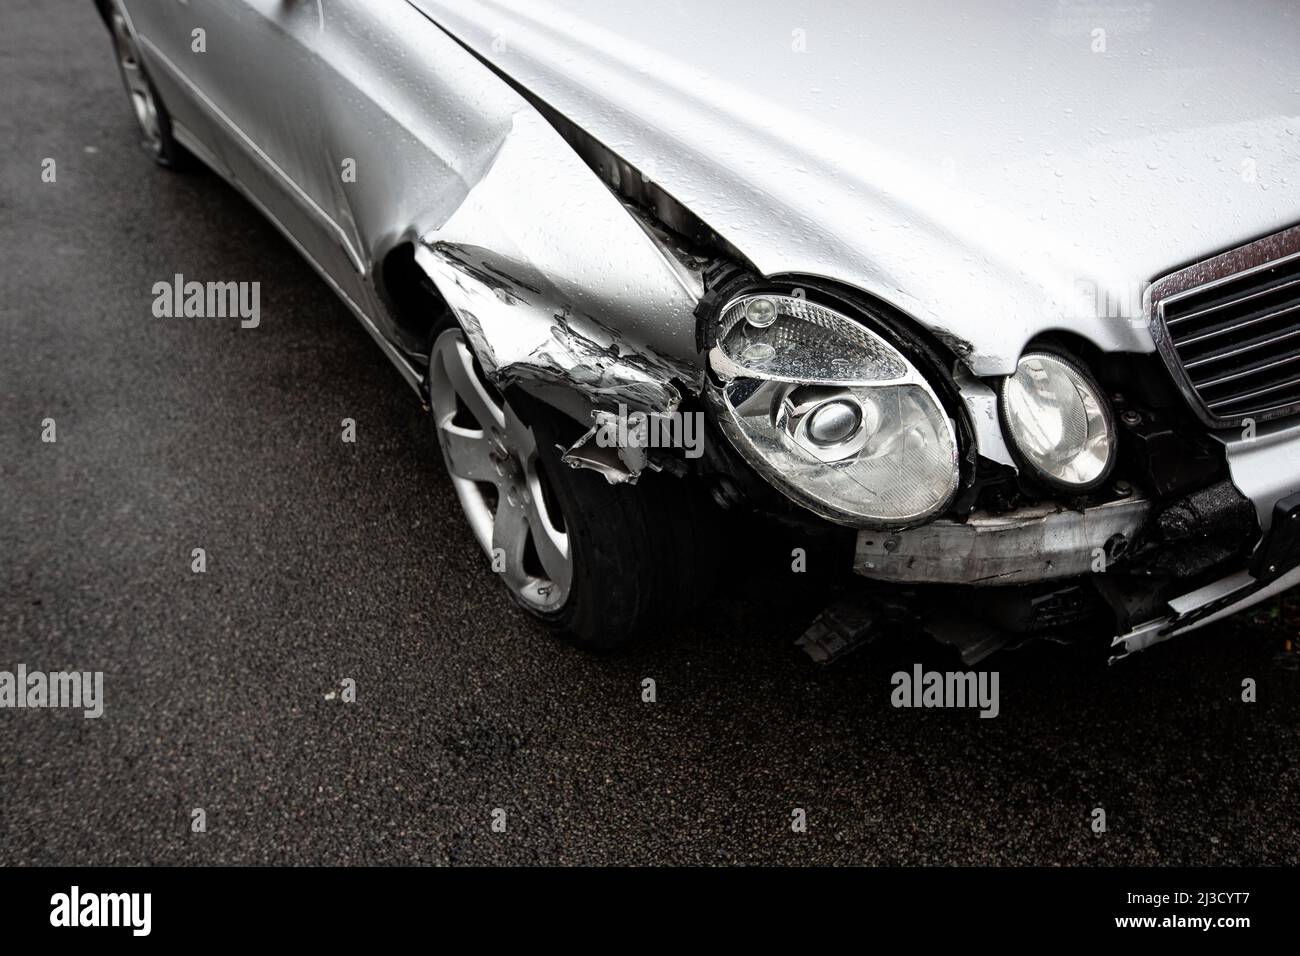 A close up of the damage to a silver car's front wing, wheel and headlights involved in a road traffic accident with copy space Stock Photo